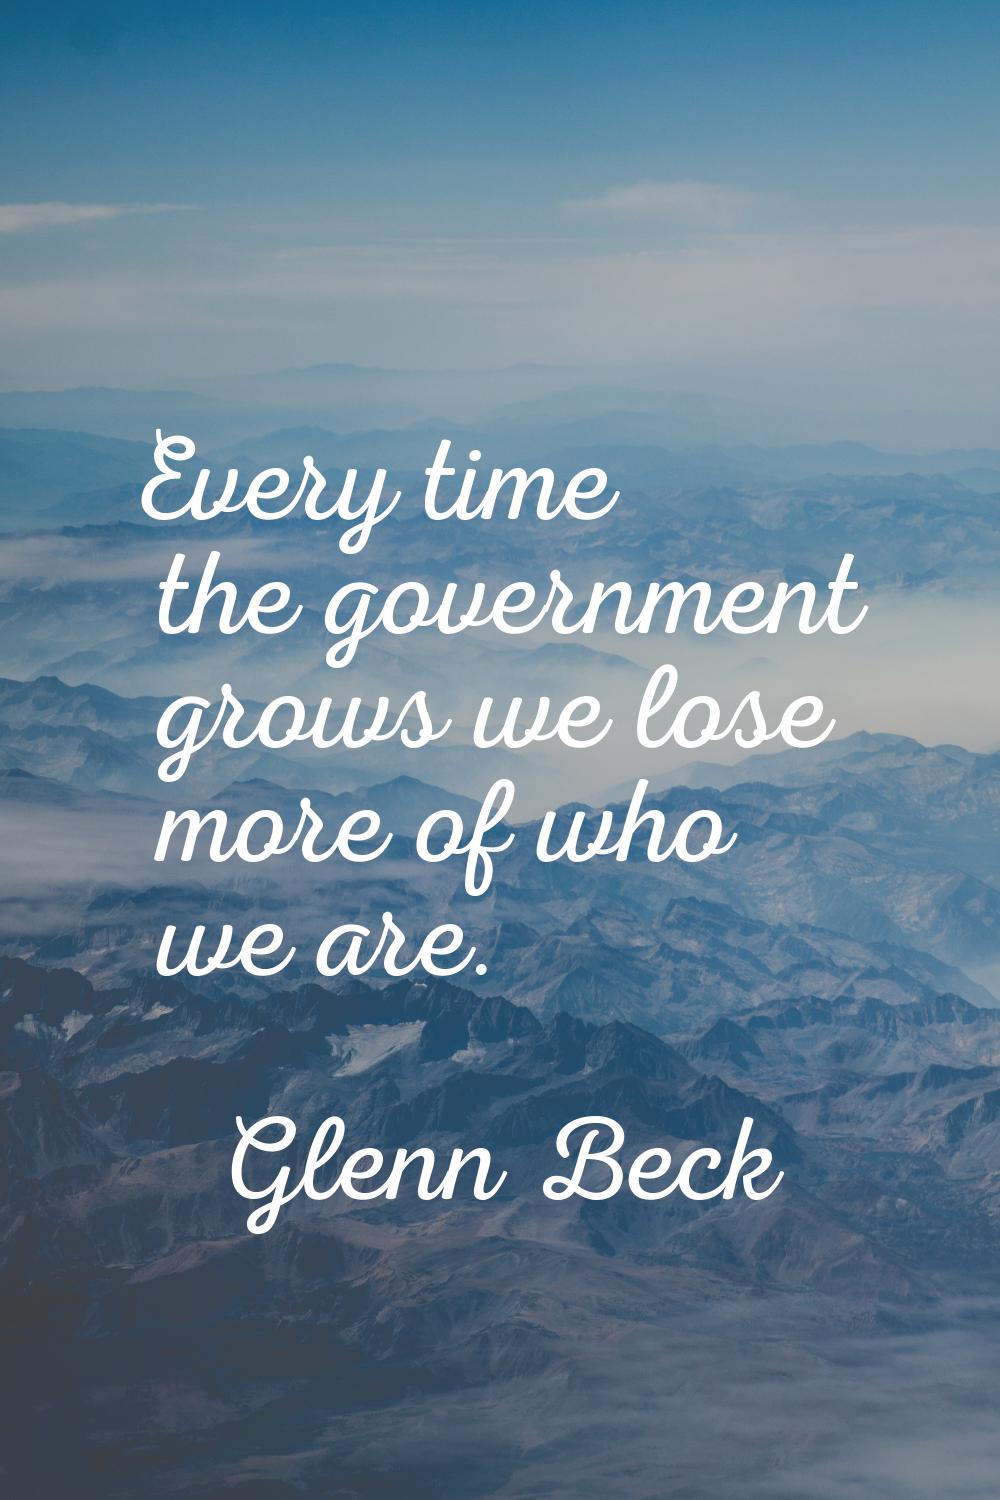 Every time the government grows we lose more of who we are.